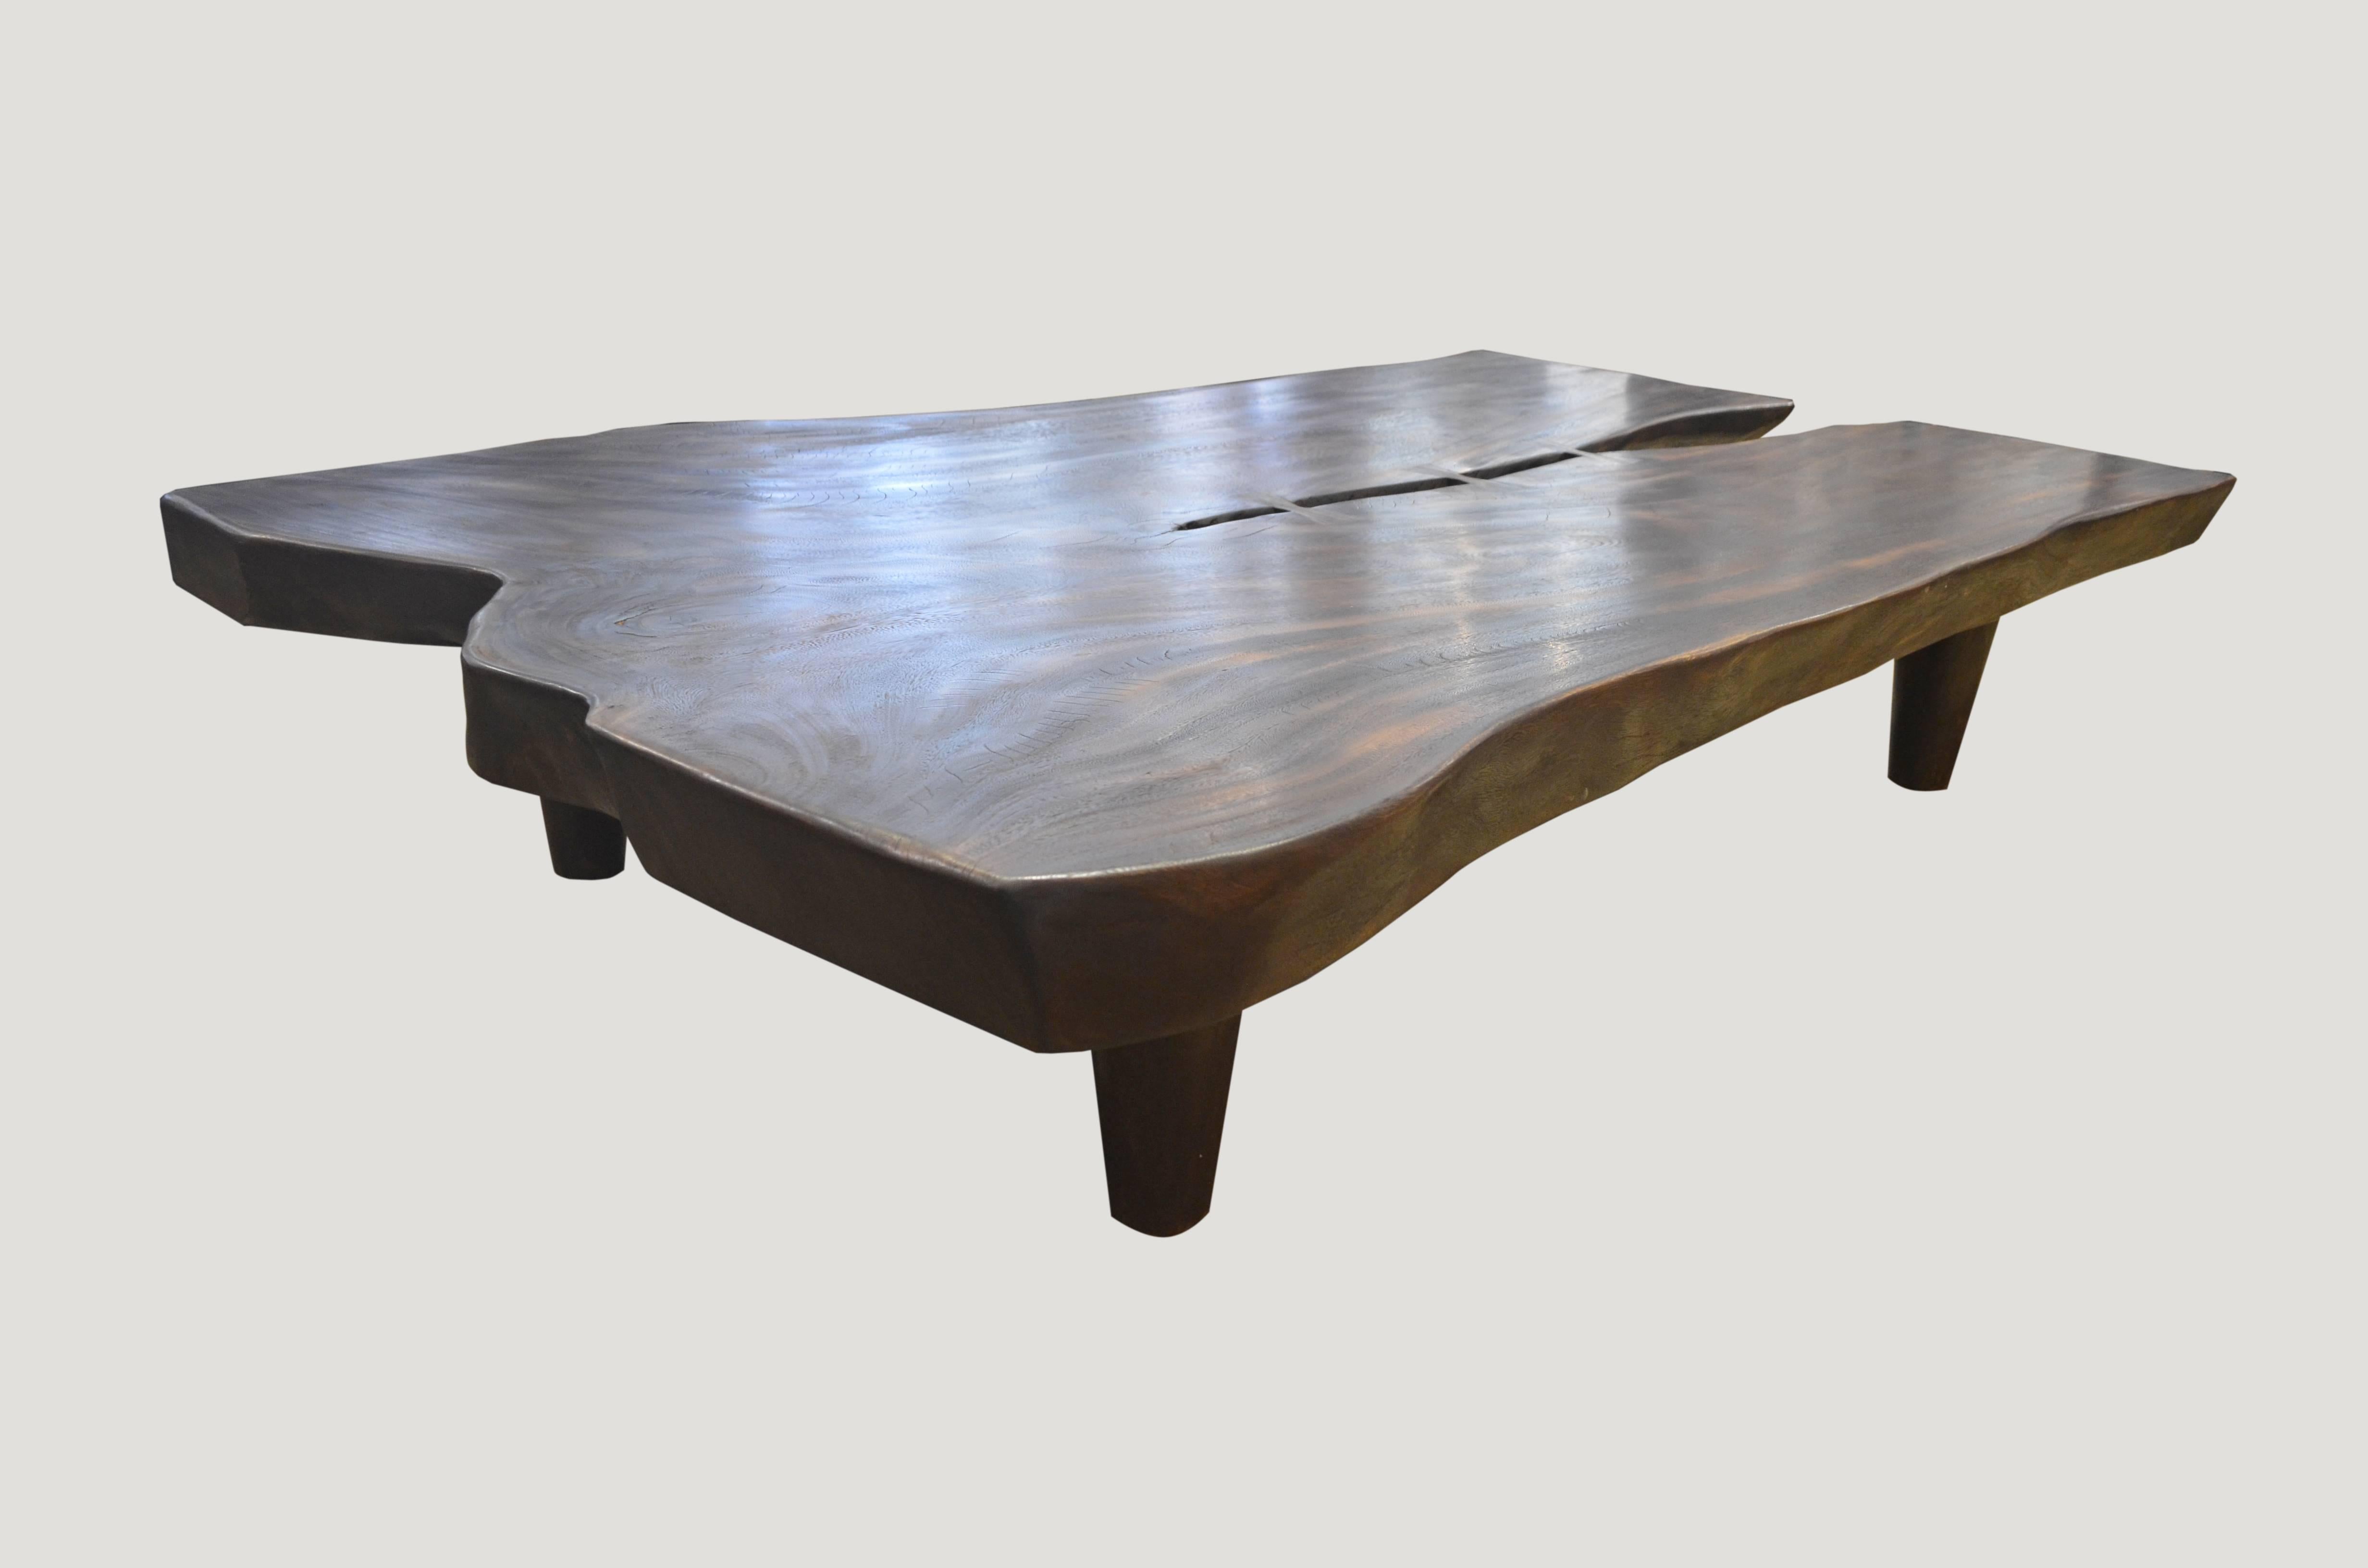 Single four thick suar wood coffee table. Burnt, sanded and sealed one time to produce a rich, chocolate finish with impressive depth, a result unachievable using standard stains and finishes. We have added butterfly details. A perfect combination